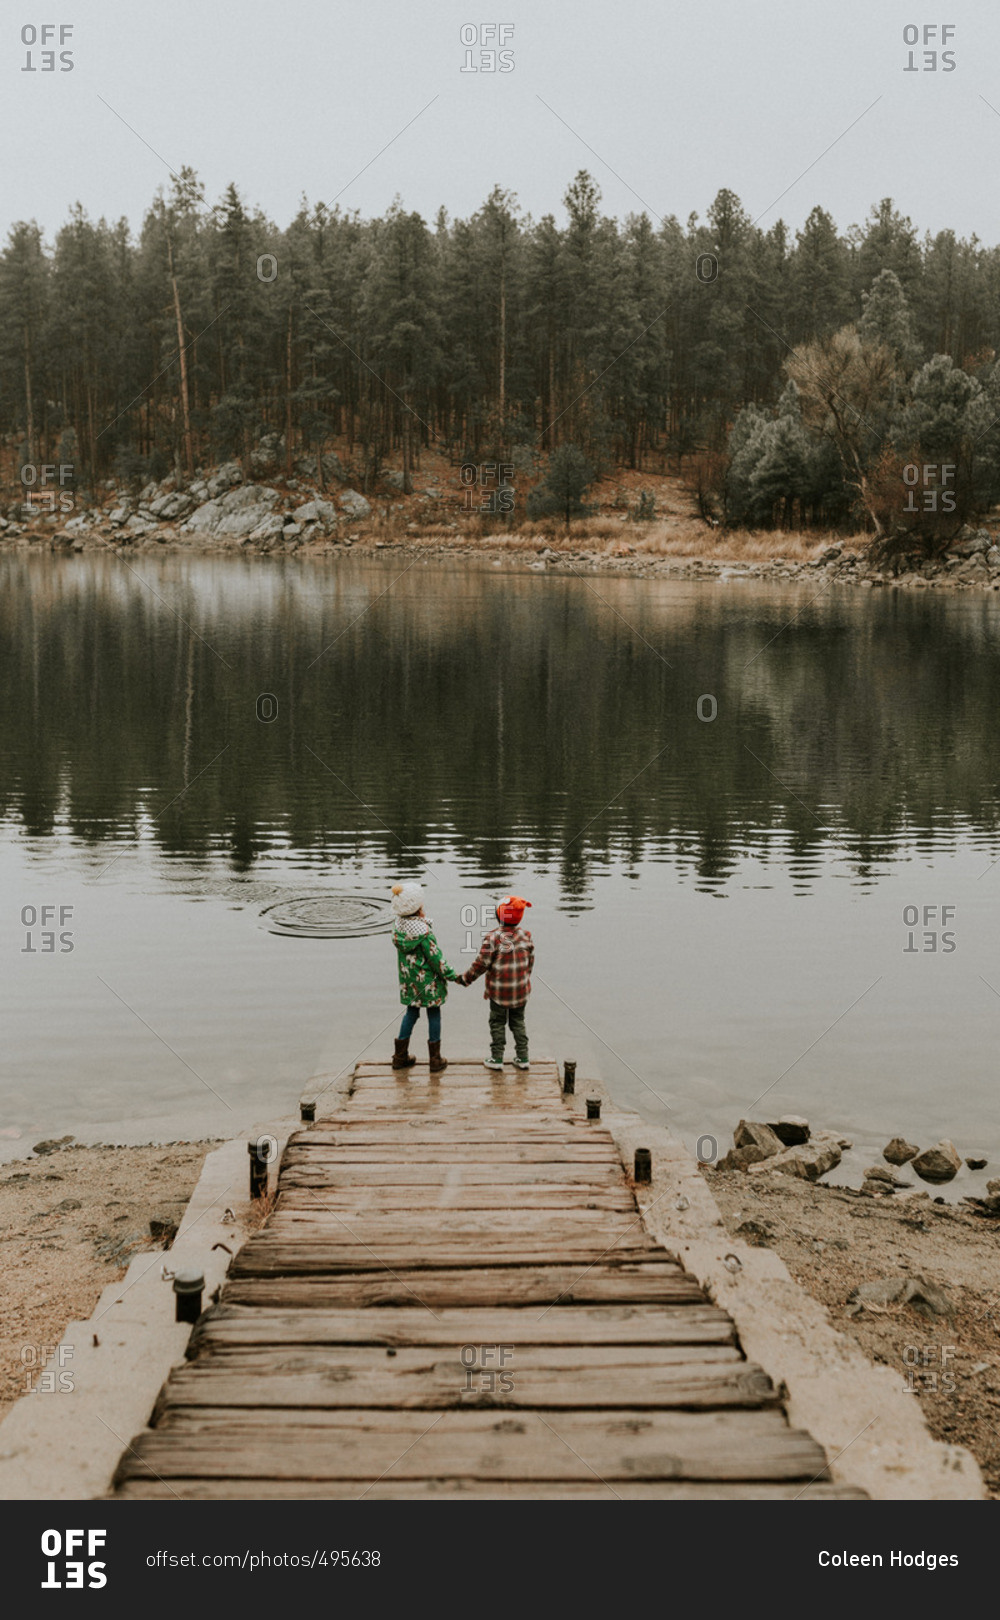 Kids holding hands by lake in cold weather